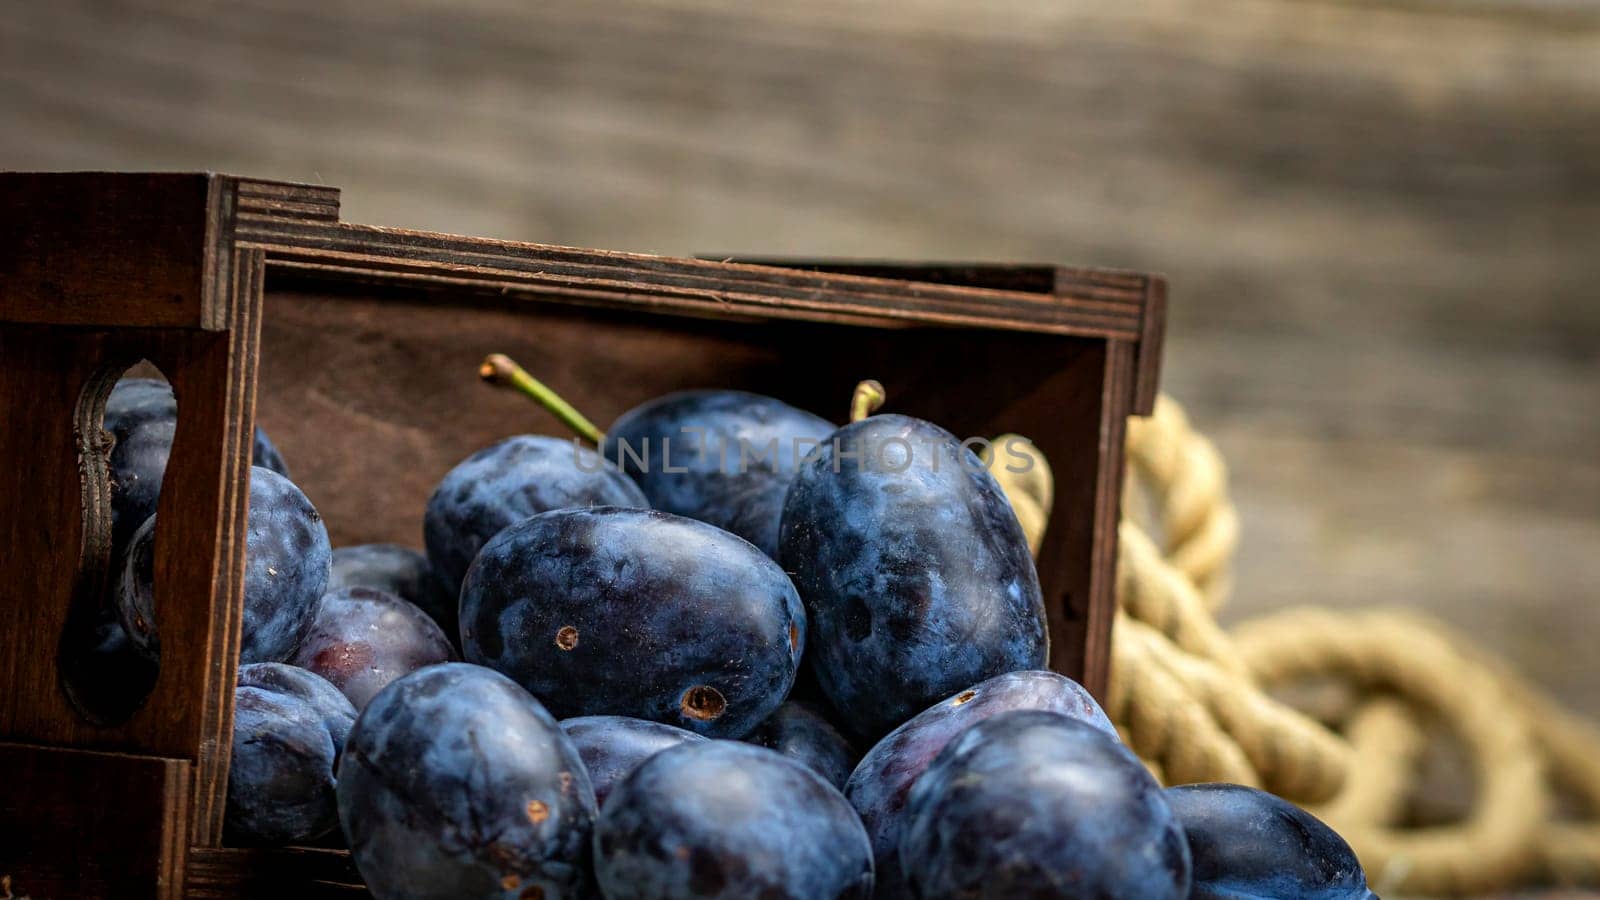 Ripe blue plums in a wooden crate in a rustic composition.